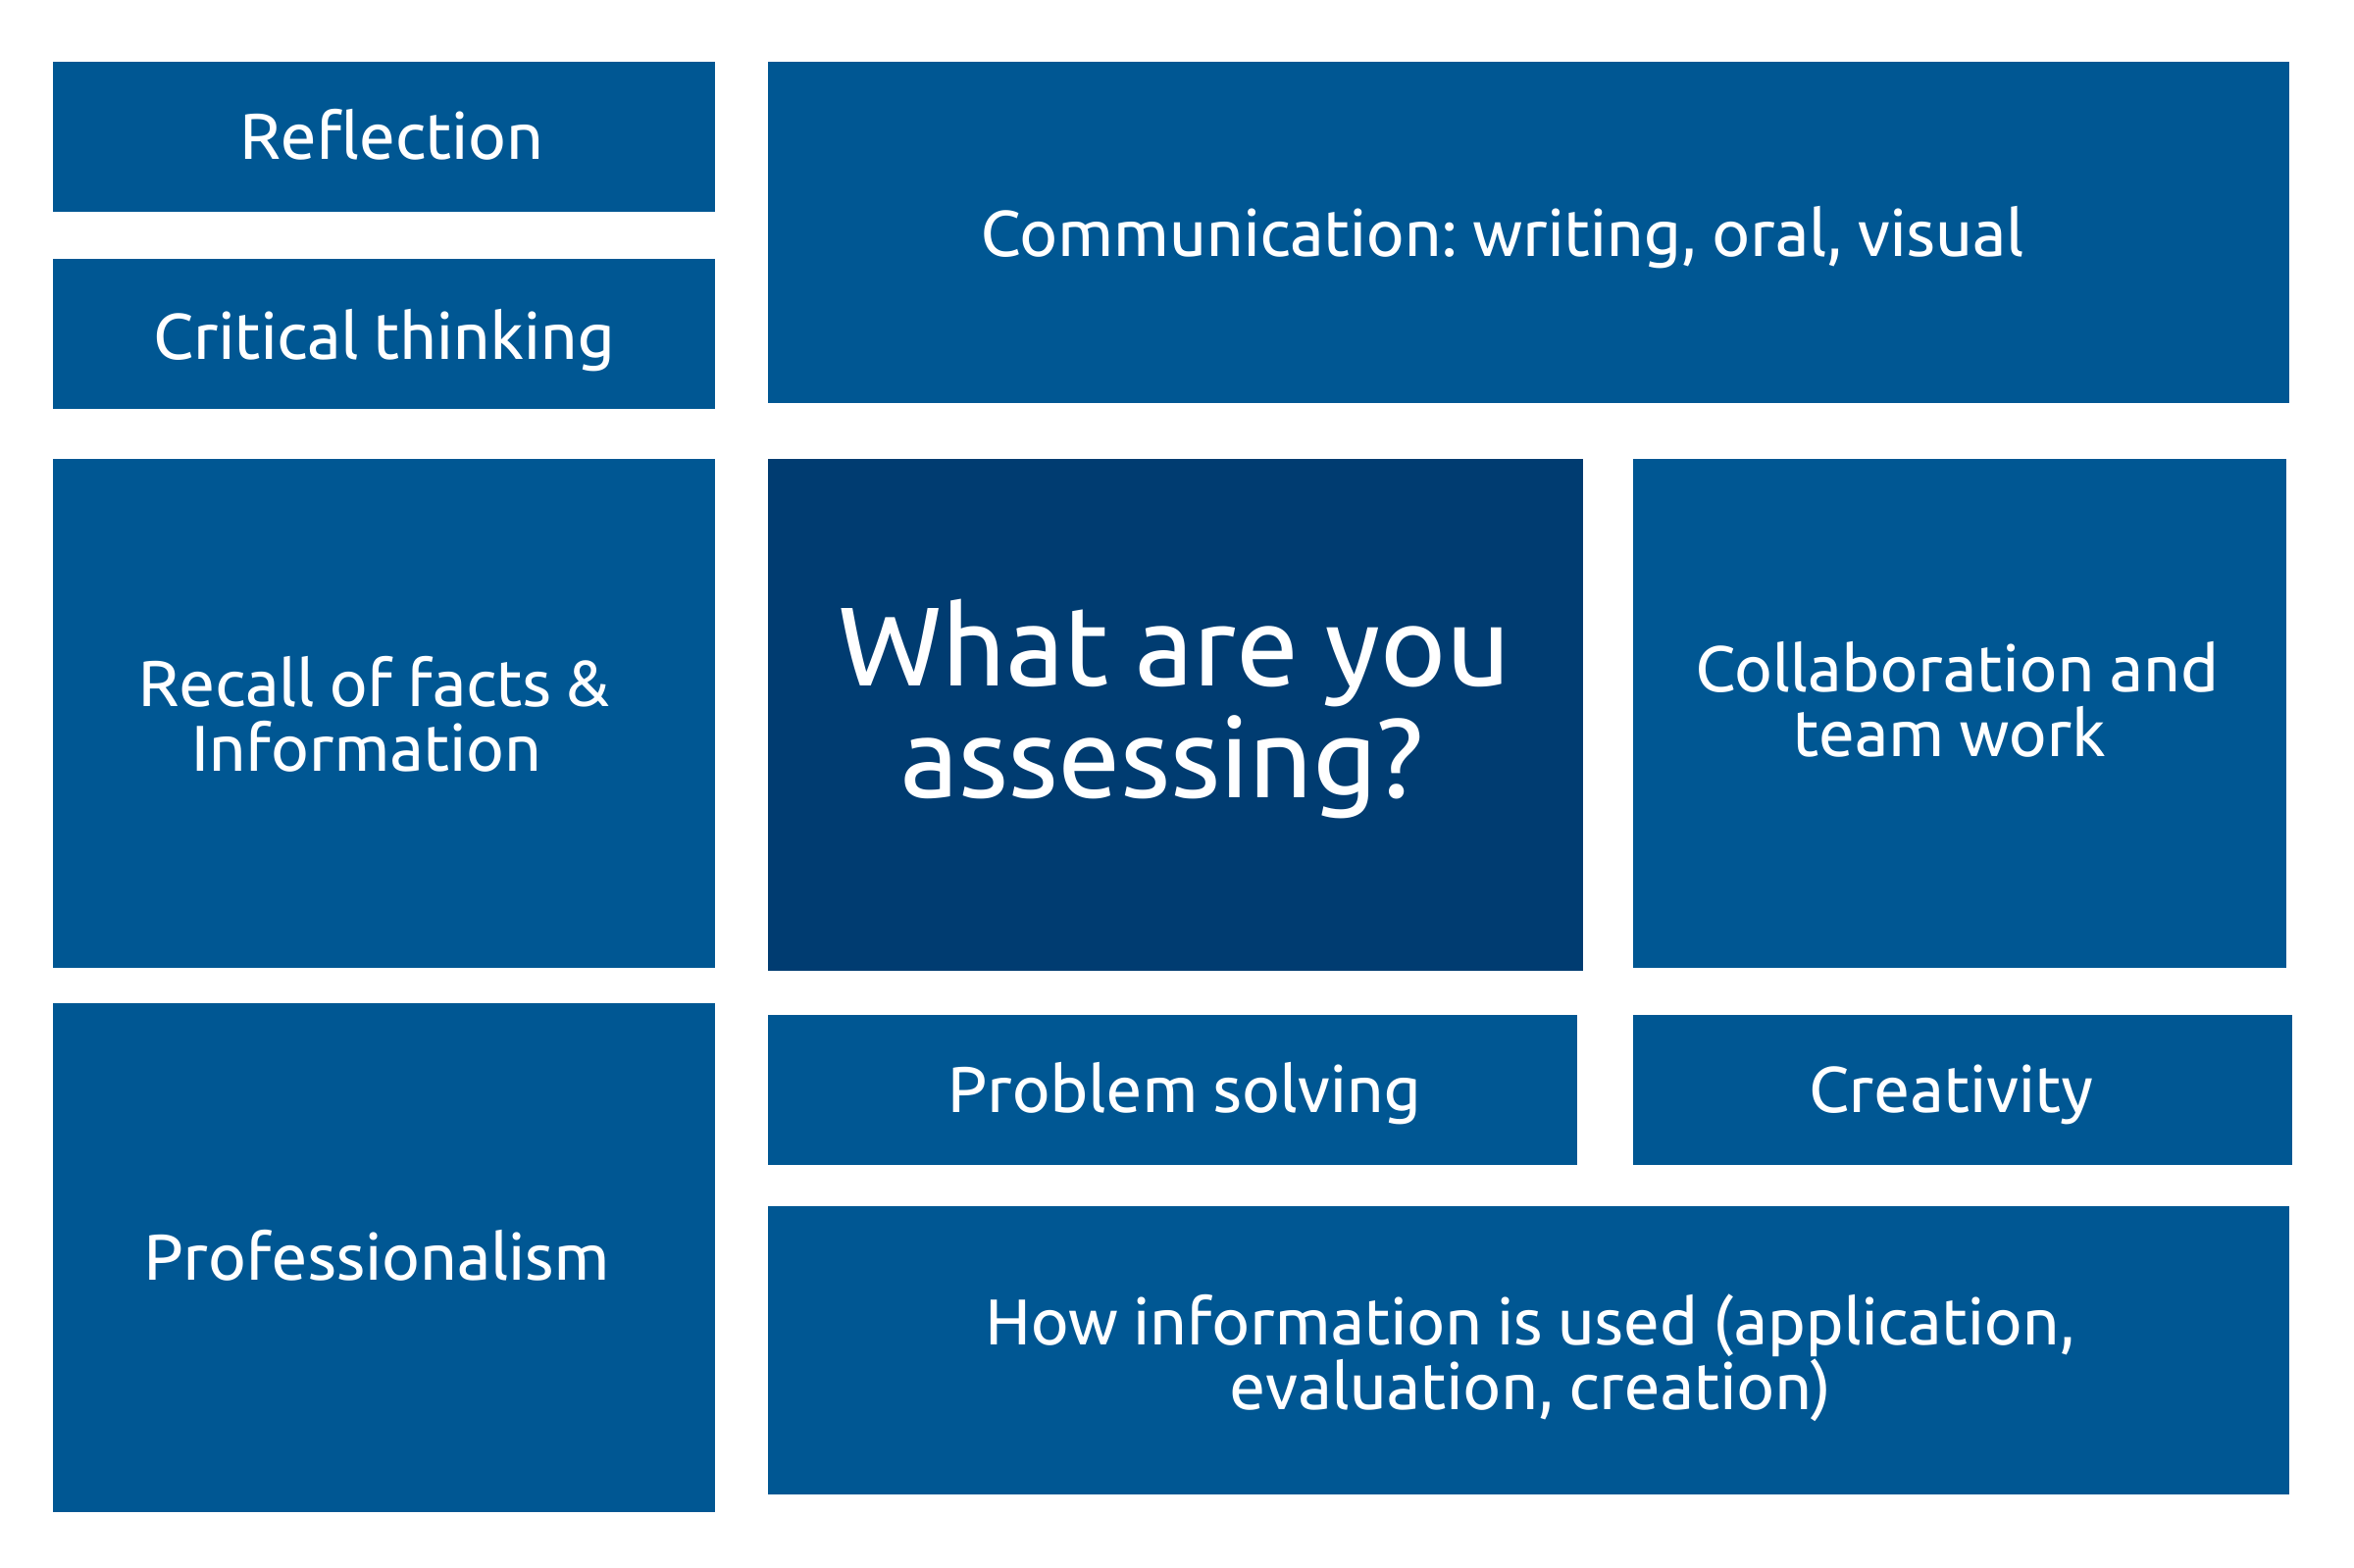 What are you assessing? Reflection, critical thinking, recall of facts and information, professionalism, communication, collaboration and team work, creativity, problem solving or how information is used